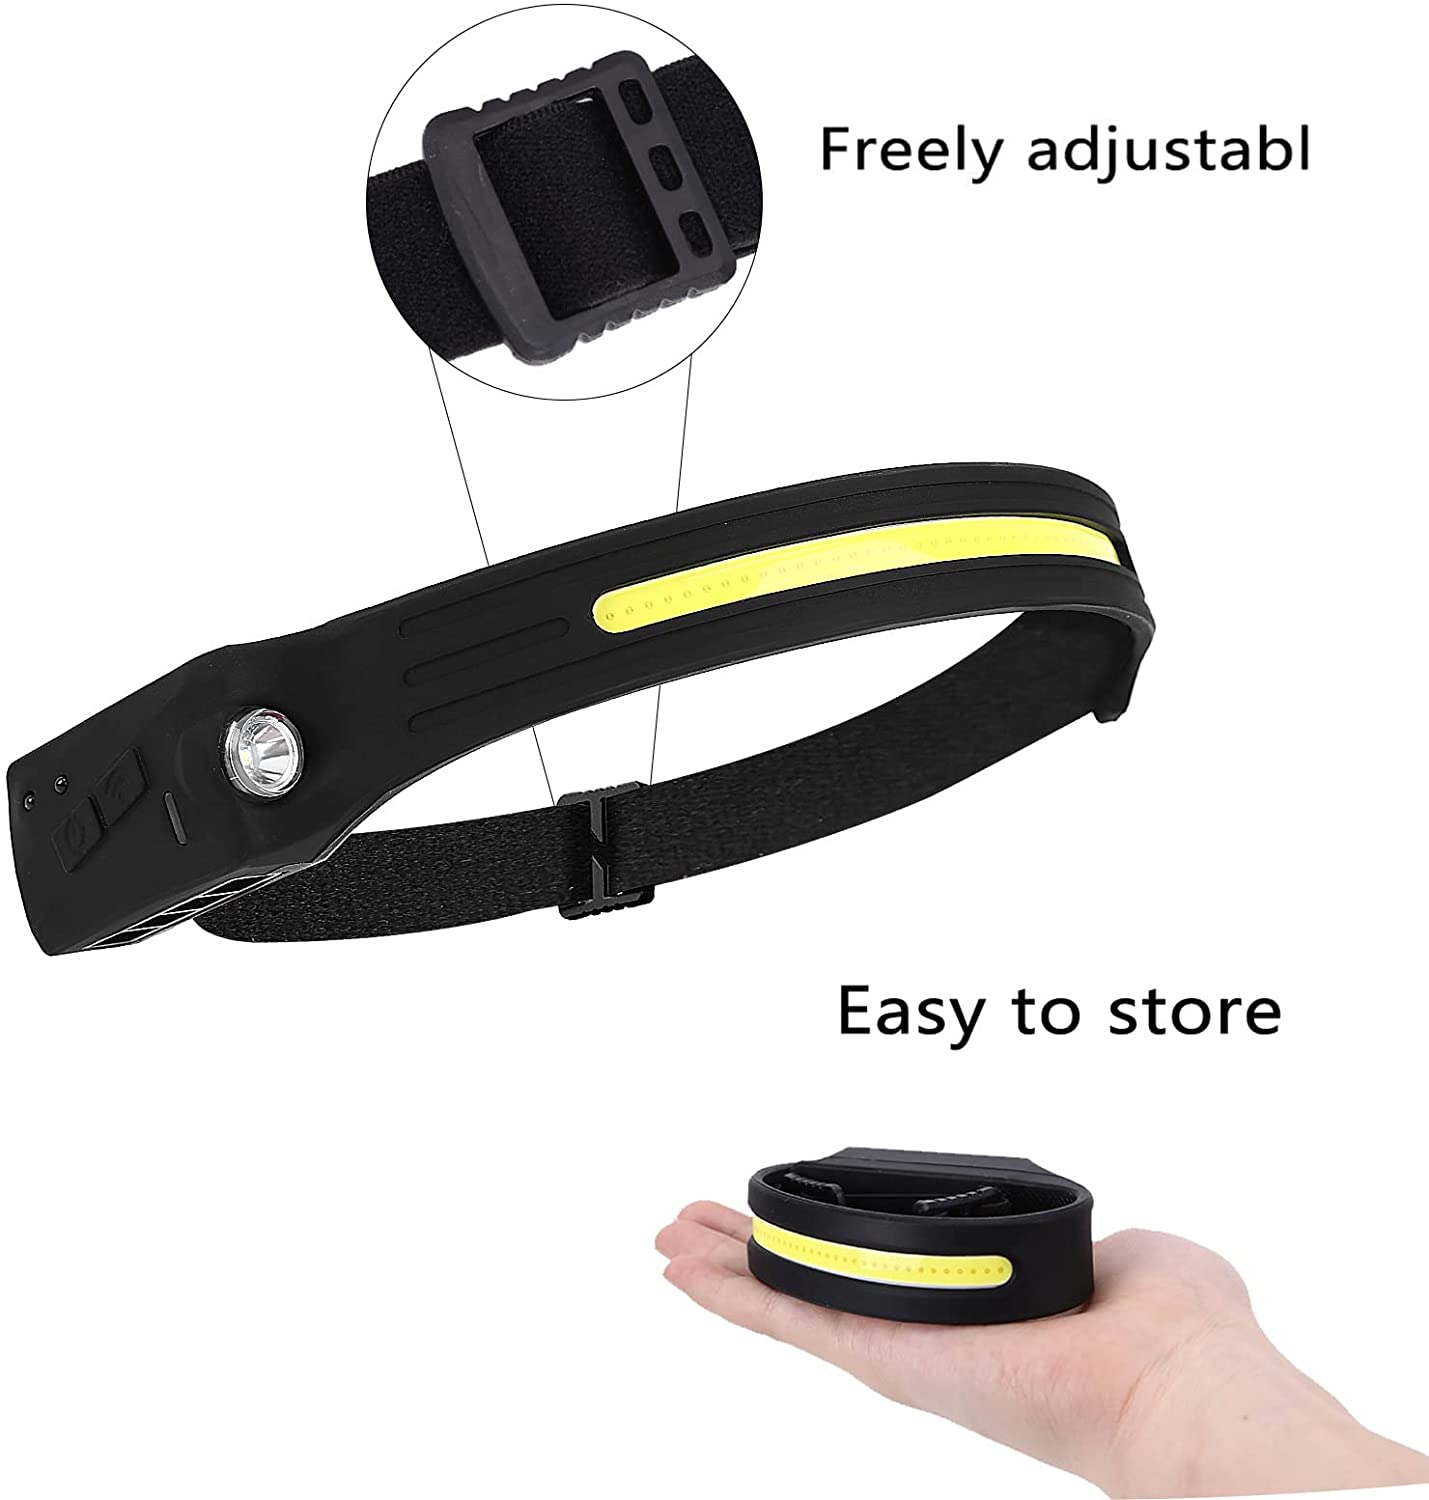 Buy LED Headlamp, 2 Pcs USB Rechargeable Headlamp with All Perspectives  Induction 230° Illumination, 5 Modes Motion Sensor Headlamp Flashlight,  Outdoor Waterproof Headlight for Running, Fishing, Camping Online in  Indonesia. B097RBDD11